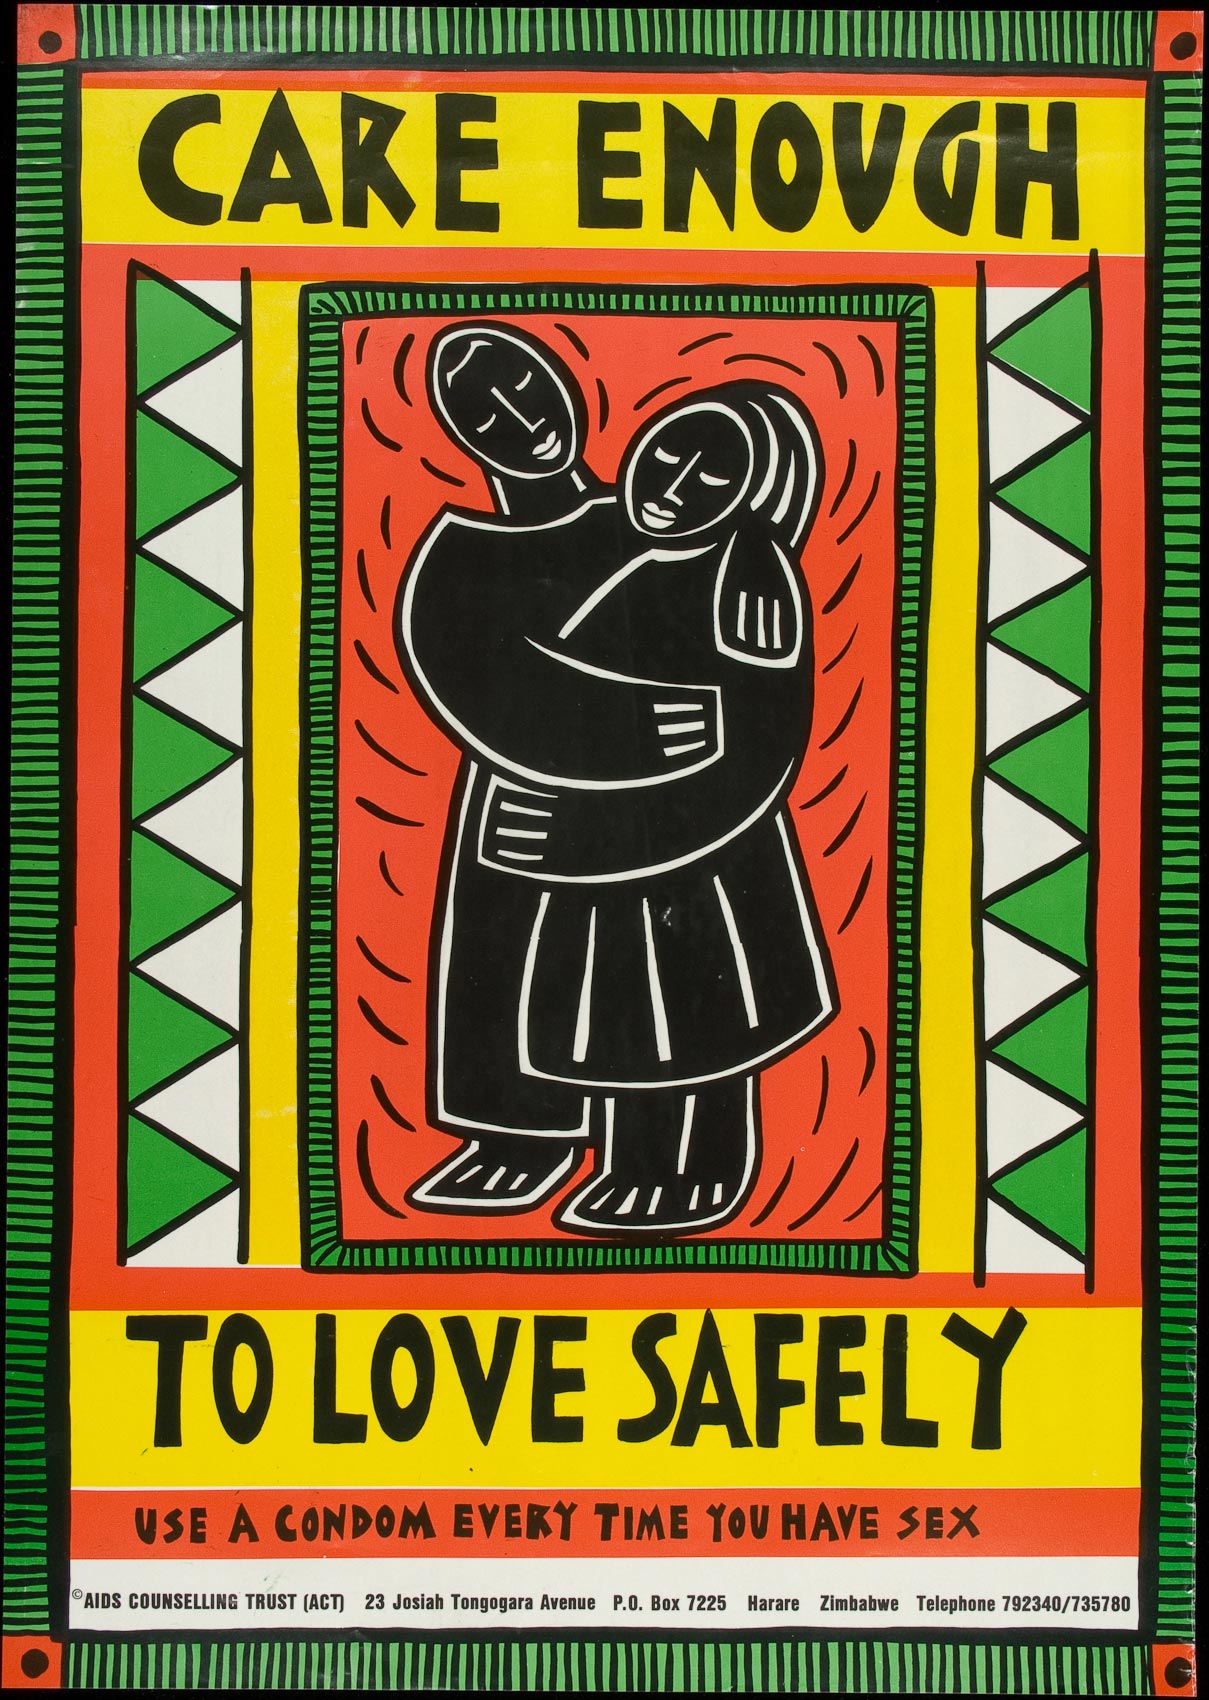 Drawn figures of a man and a woman embrace surrounded by red, yellow and green graphics.